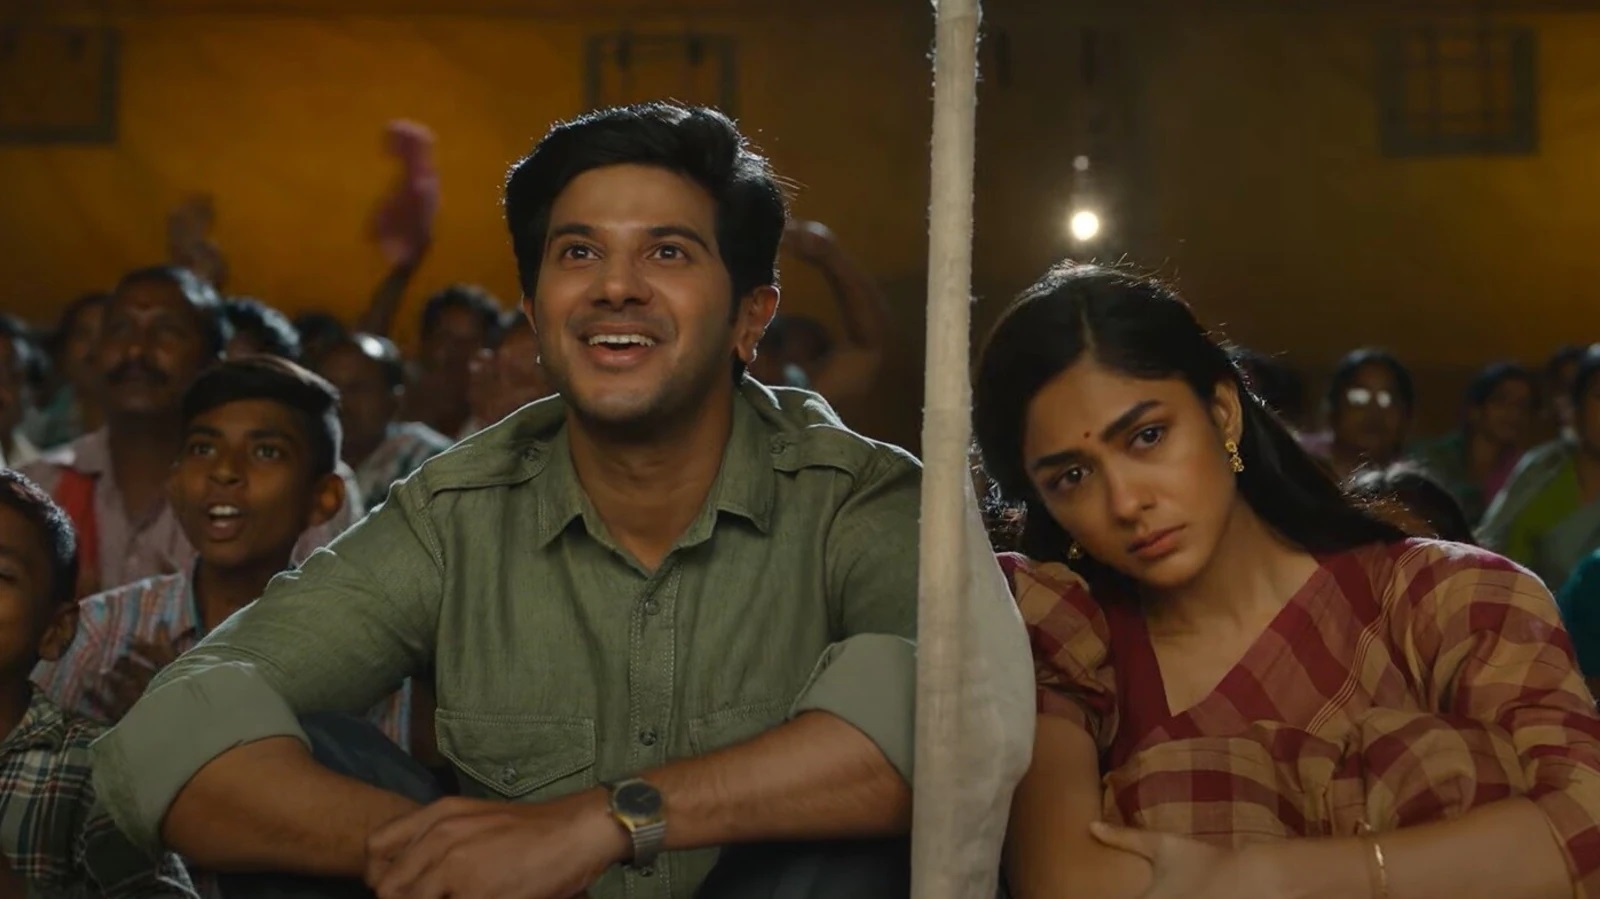 'Sita Ramam' Reviews: Check Out What Audiences Say About Rashmika Mandanna's New Film